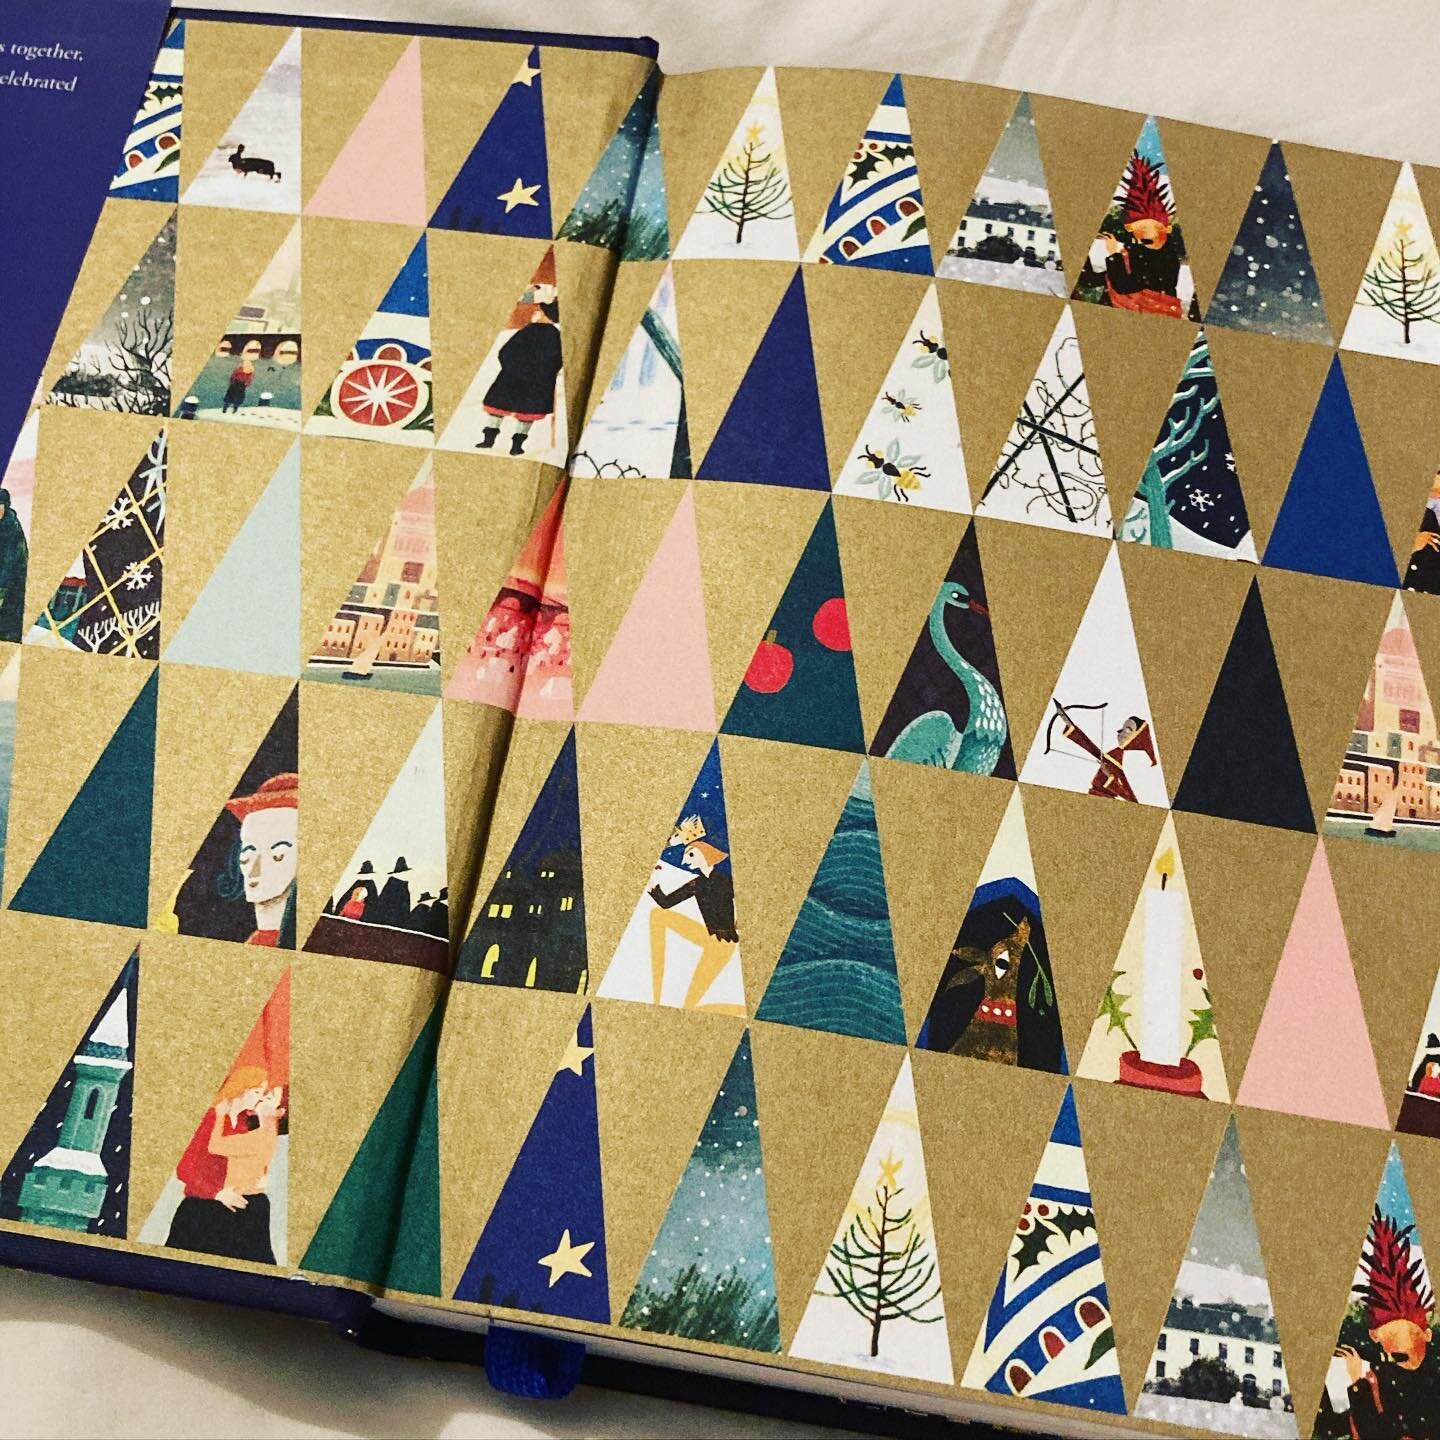 Cor get a load of the endpapers for Carol Ann Duffy&rsquo;s Christmas Poems&hellip; too early? Not feeling it at all yet, but wrapping presents for a weekend away with friends tonight and might just crack open the ginger wine&hellip;

#carolannduffy 